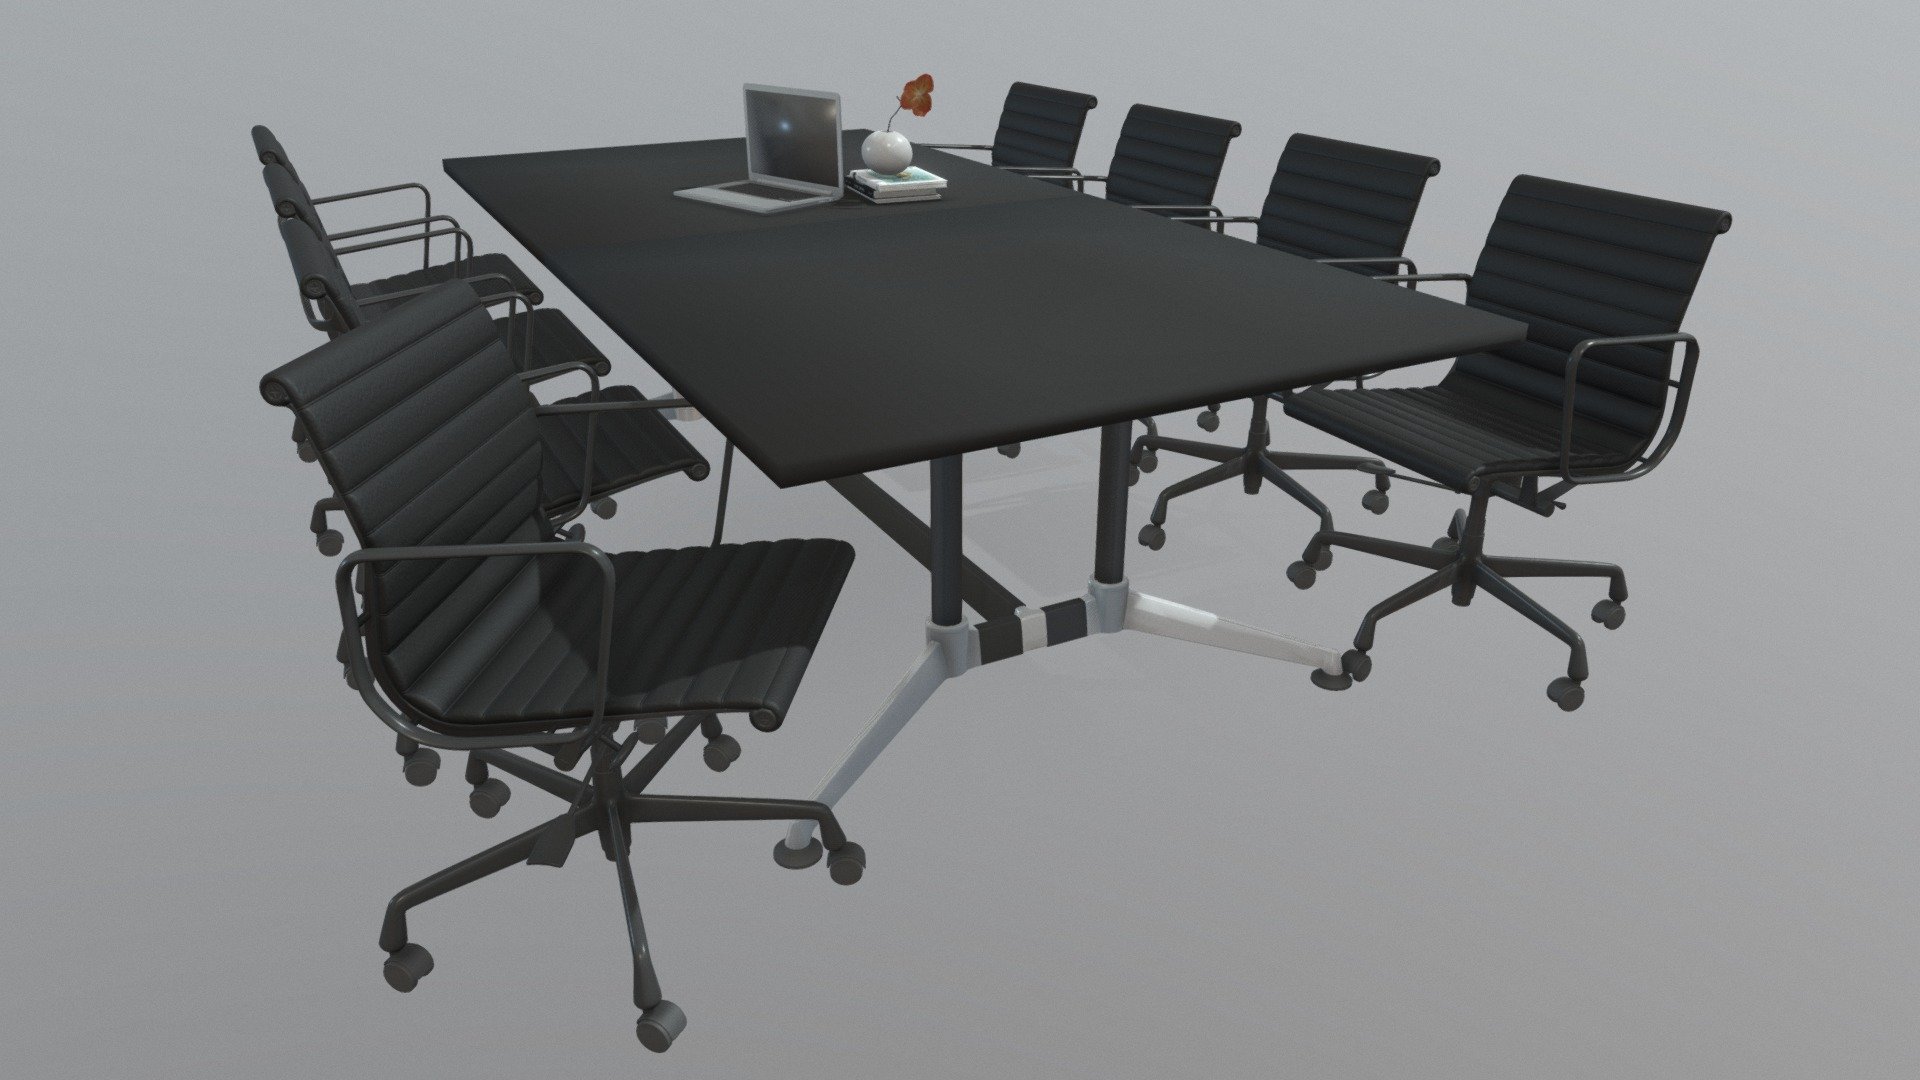 Is your office looking for the perfect boardroom table? A combination of functional and aesthetically pleasing? Then look no further. My stylish slick design is sure to compliment any space. I come in both white and black, allowing me to suit with you. We know boardrooms come in various sizes, so select a table size to suit the length and width of your boardroom, meeting room and conference room. My simple design is combined with the sophisticated matte black plated support beam and polished chrome legs that are highly durable. If you’re looking for a table that is both functional and great value for money, you’ve found it! - Blackjack Boardroom Table 2400 Chrome Frame - 3D model by JasonL (@mauri.schnyder) 3d model